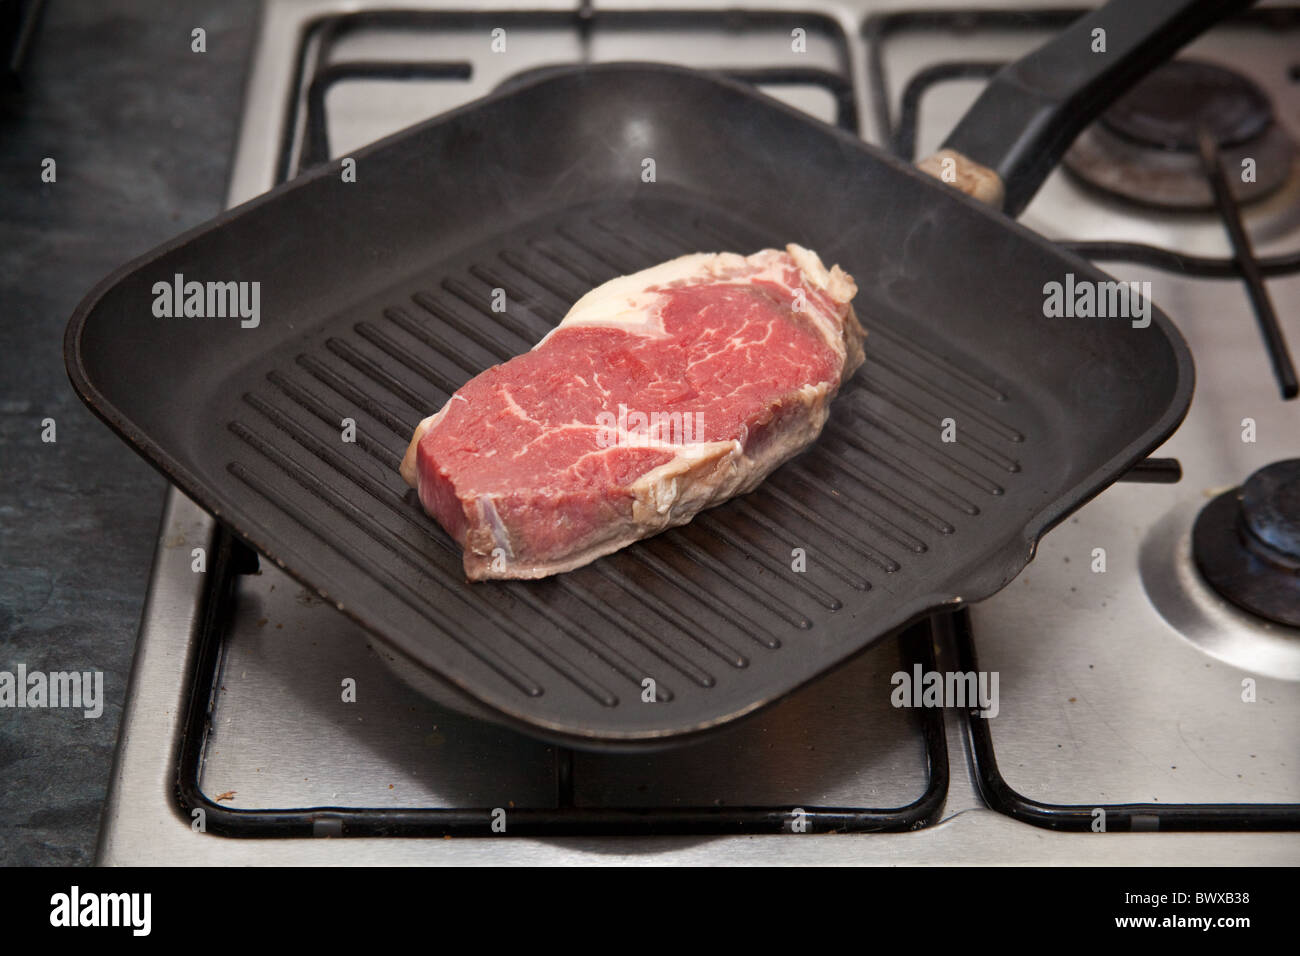 Rump steak being cooked in a griddle pan. Stock Photo